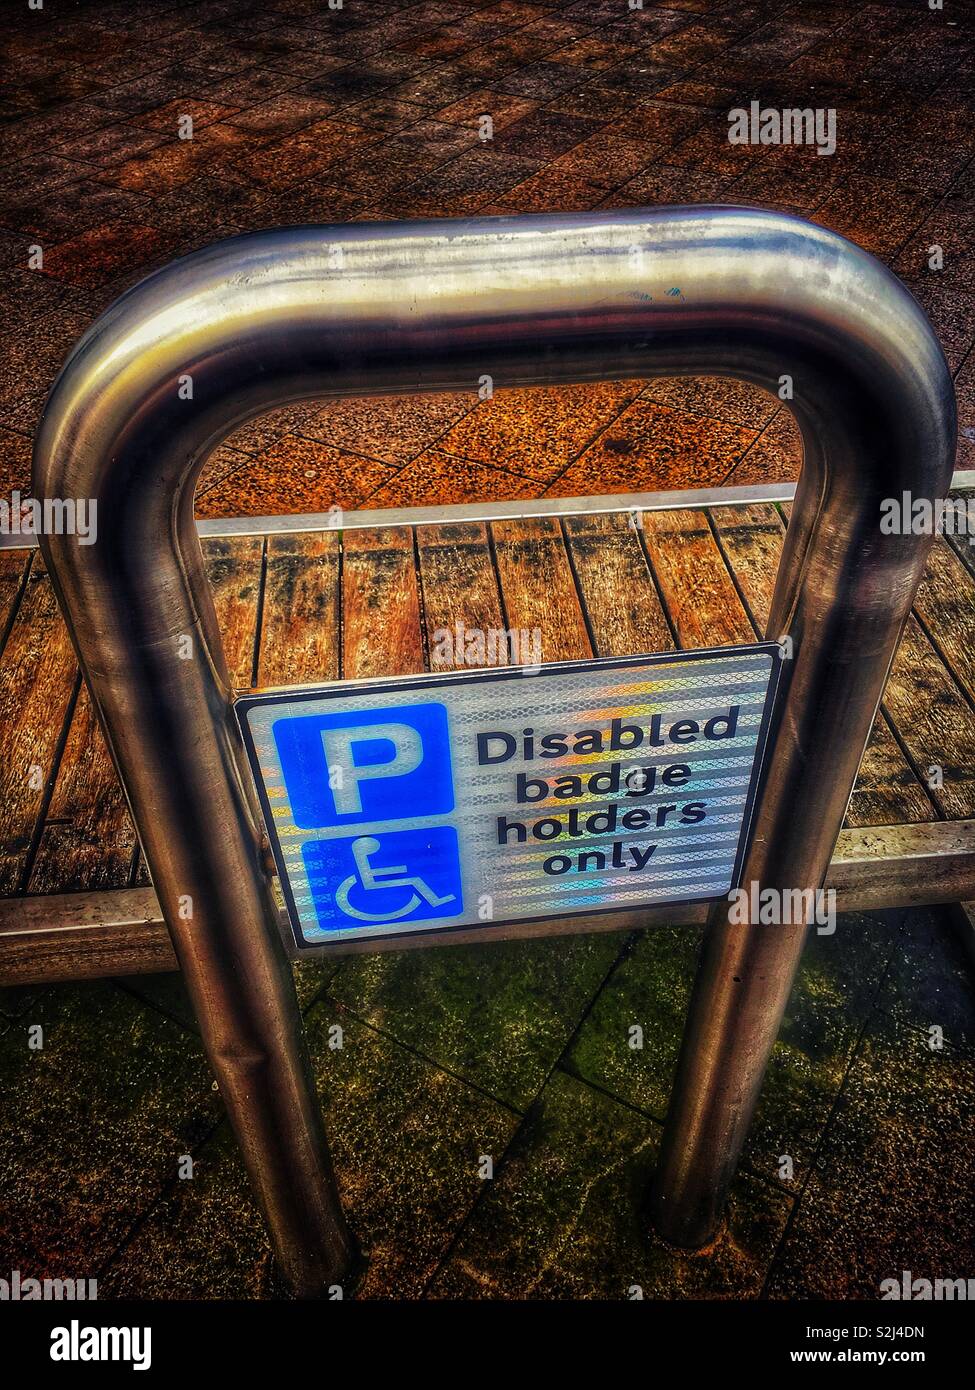 Parking space for disabled people sign Stock Photo